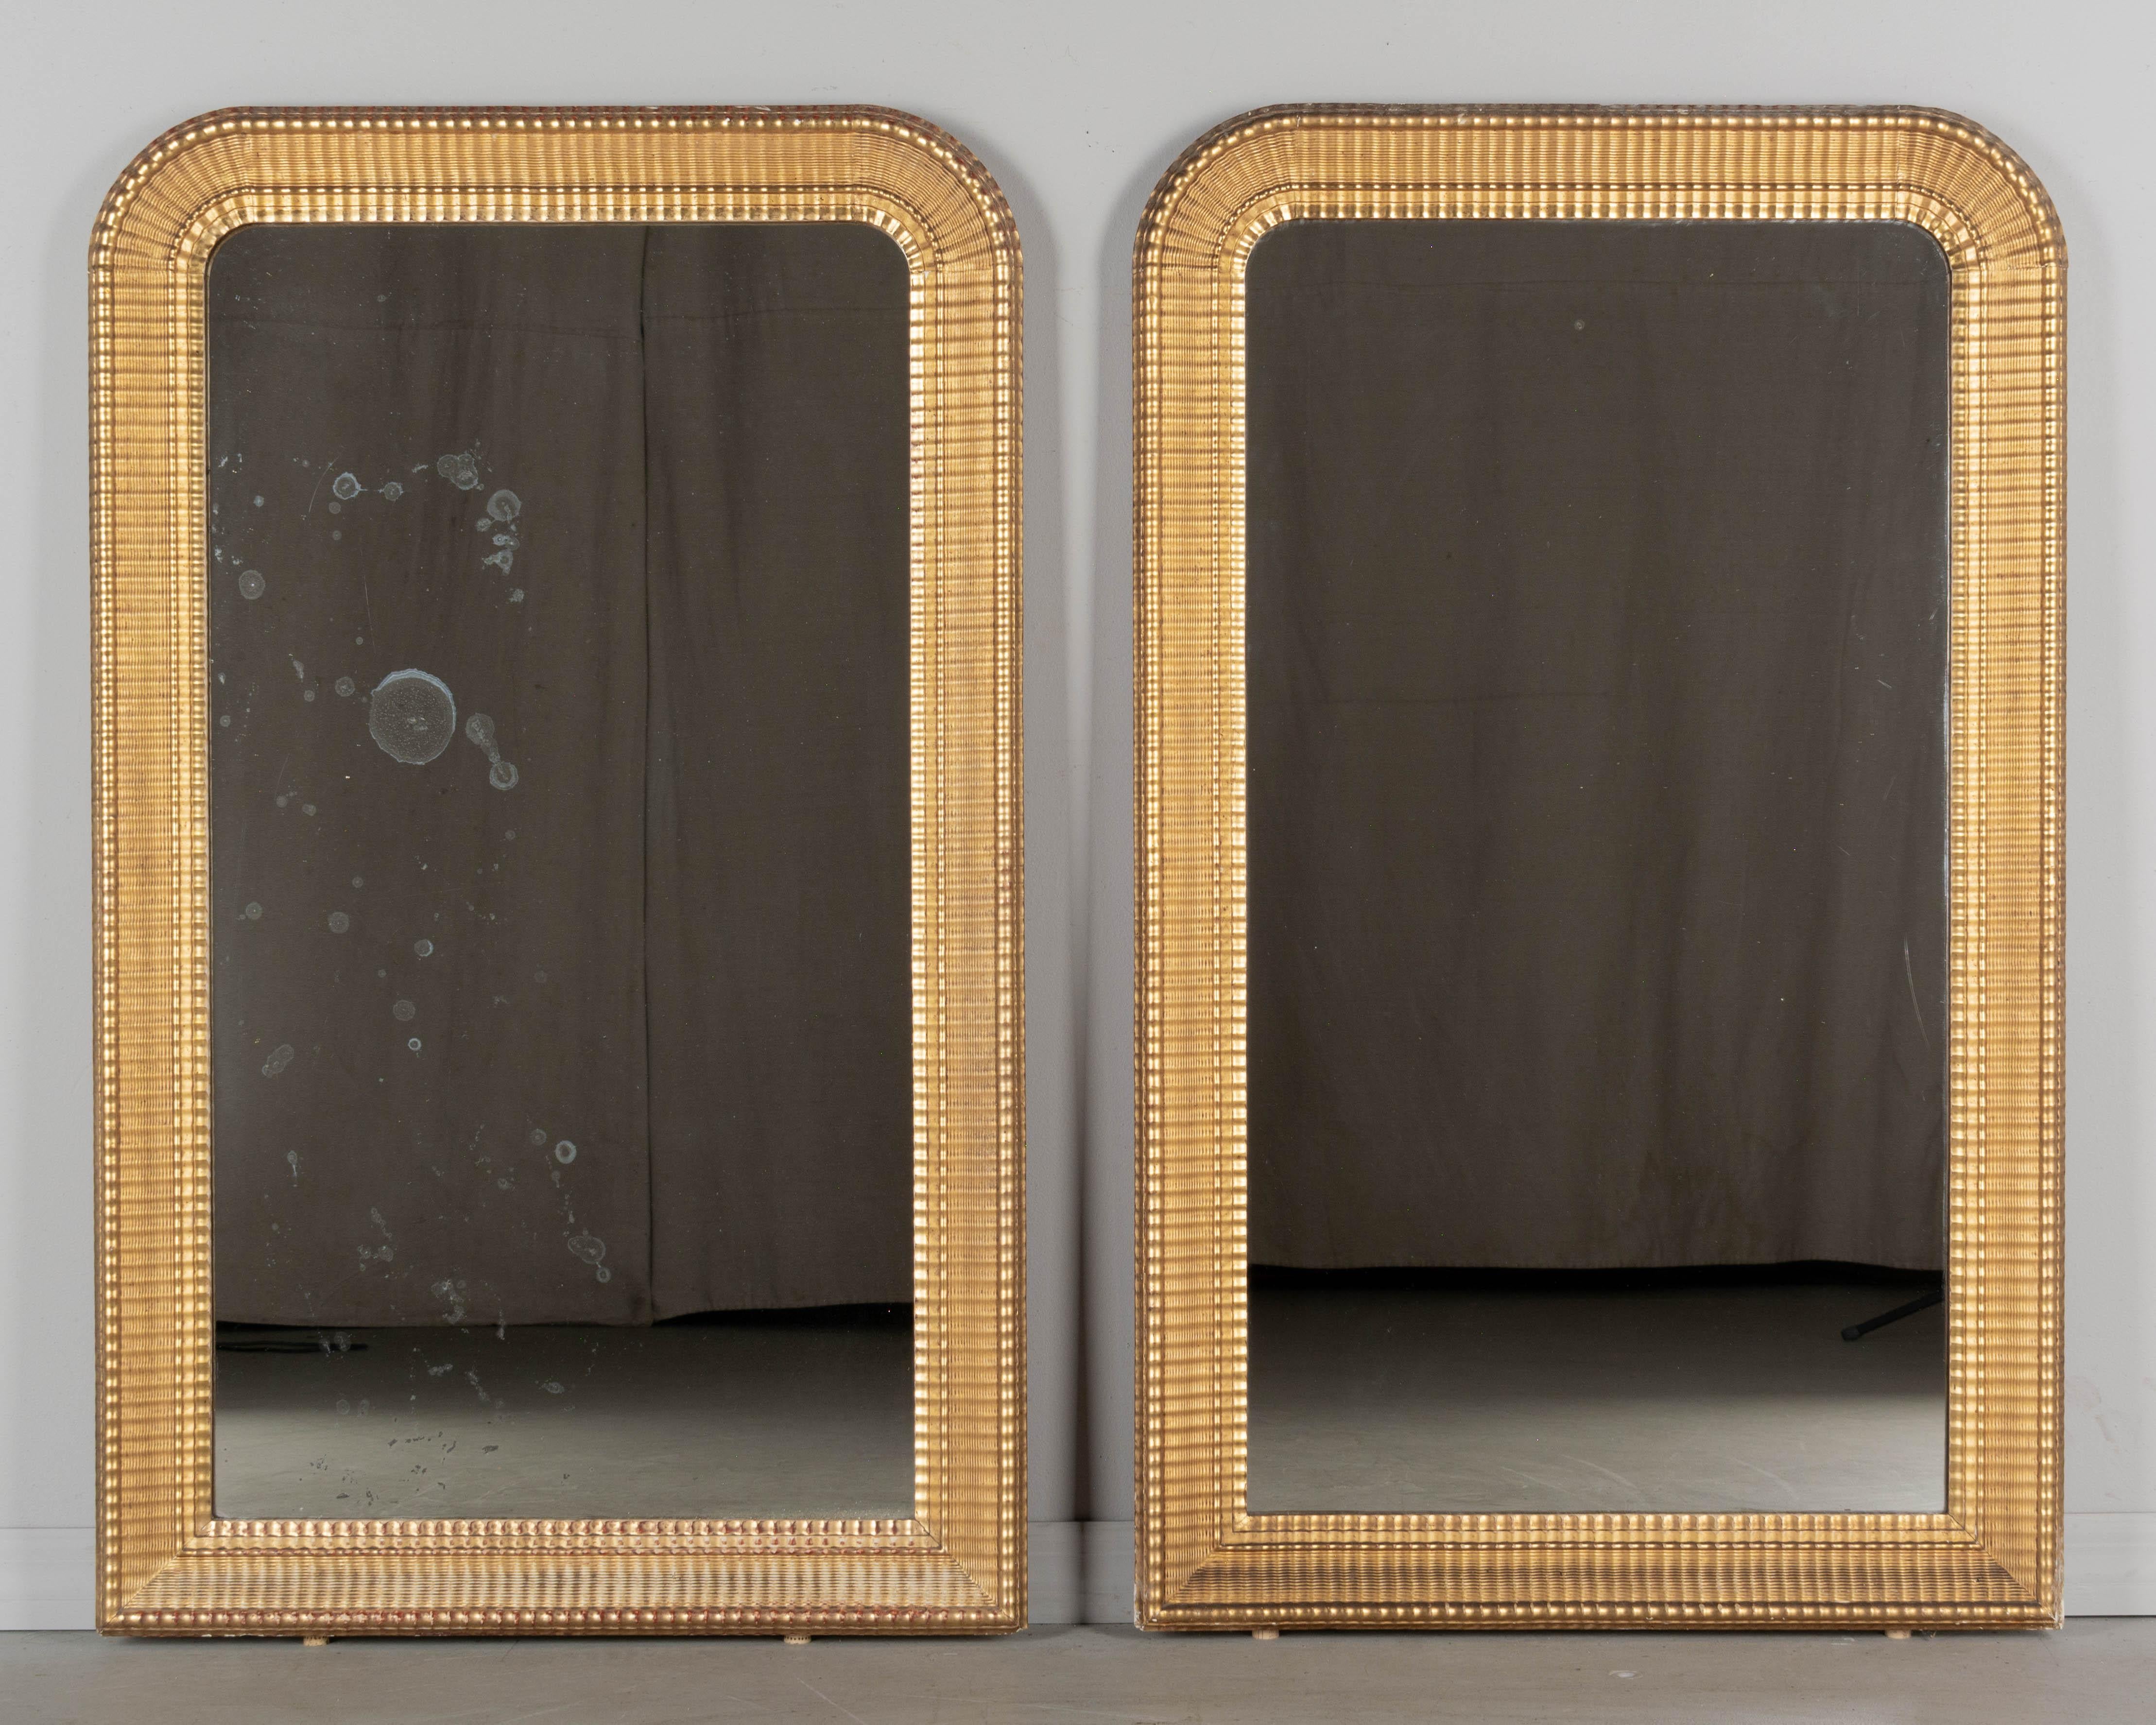 A pair of 19th century French Louis Philippe style giltwood mirrors with curved top, 3.5 inch wide ribbed frame with warm gilt finish. Original mirror with old silvering, one with some spotting. Minor loss to gilt. Circa 1880-1900. 
Dimensions: